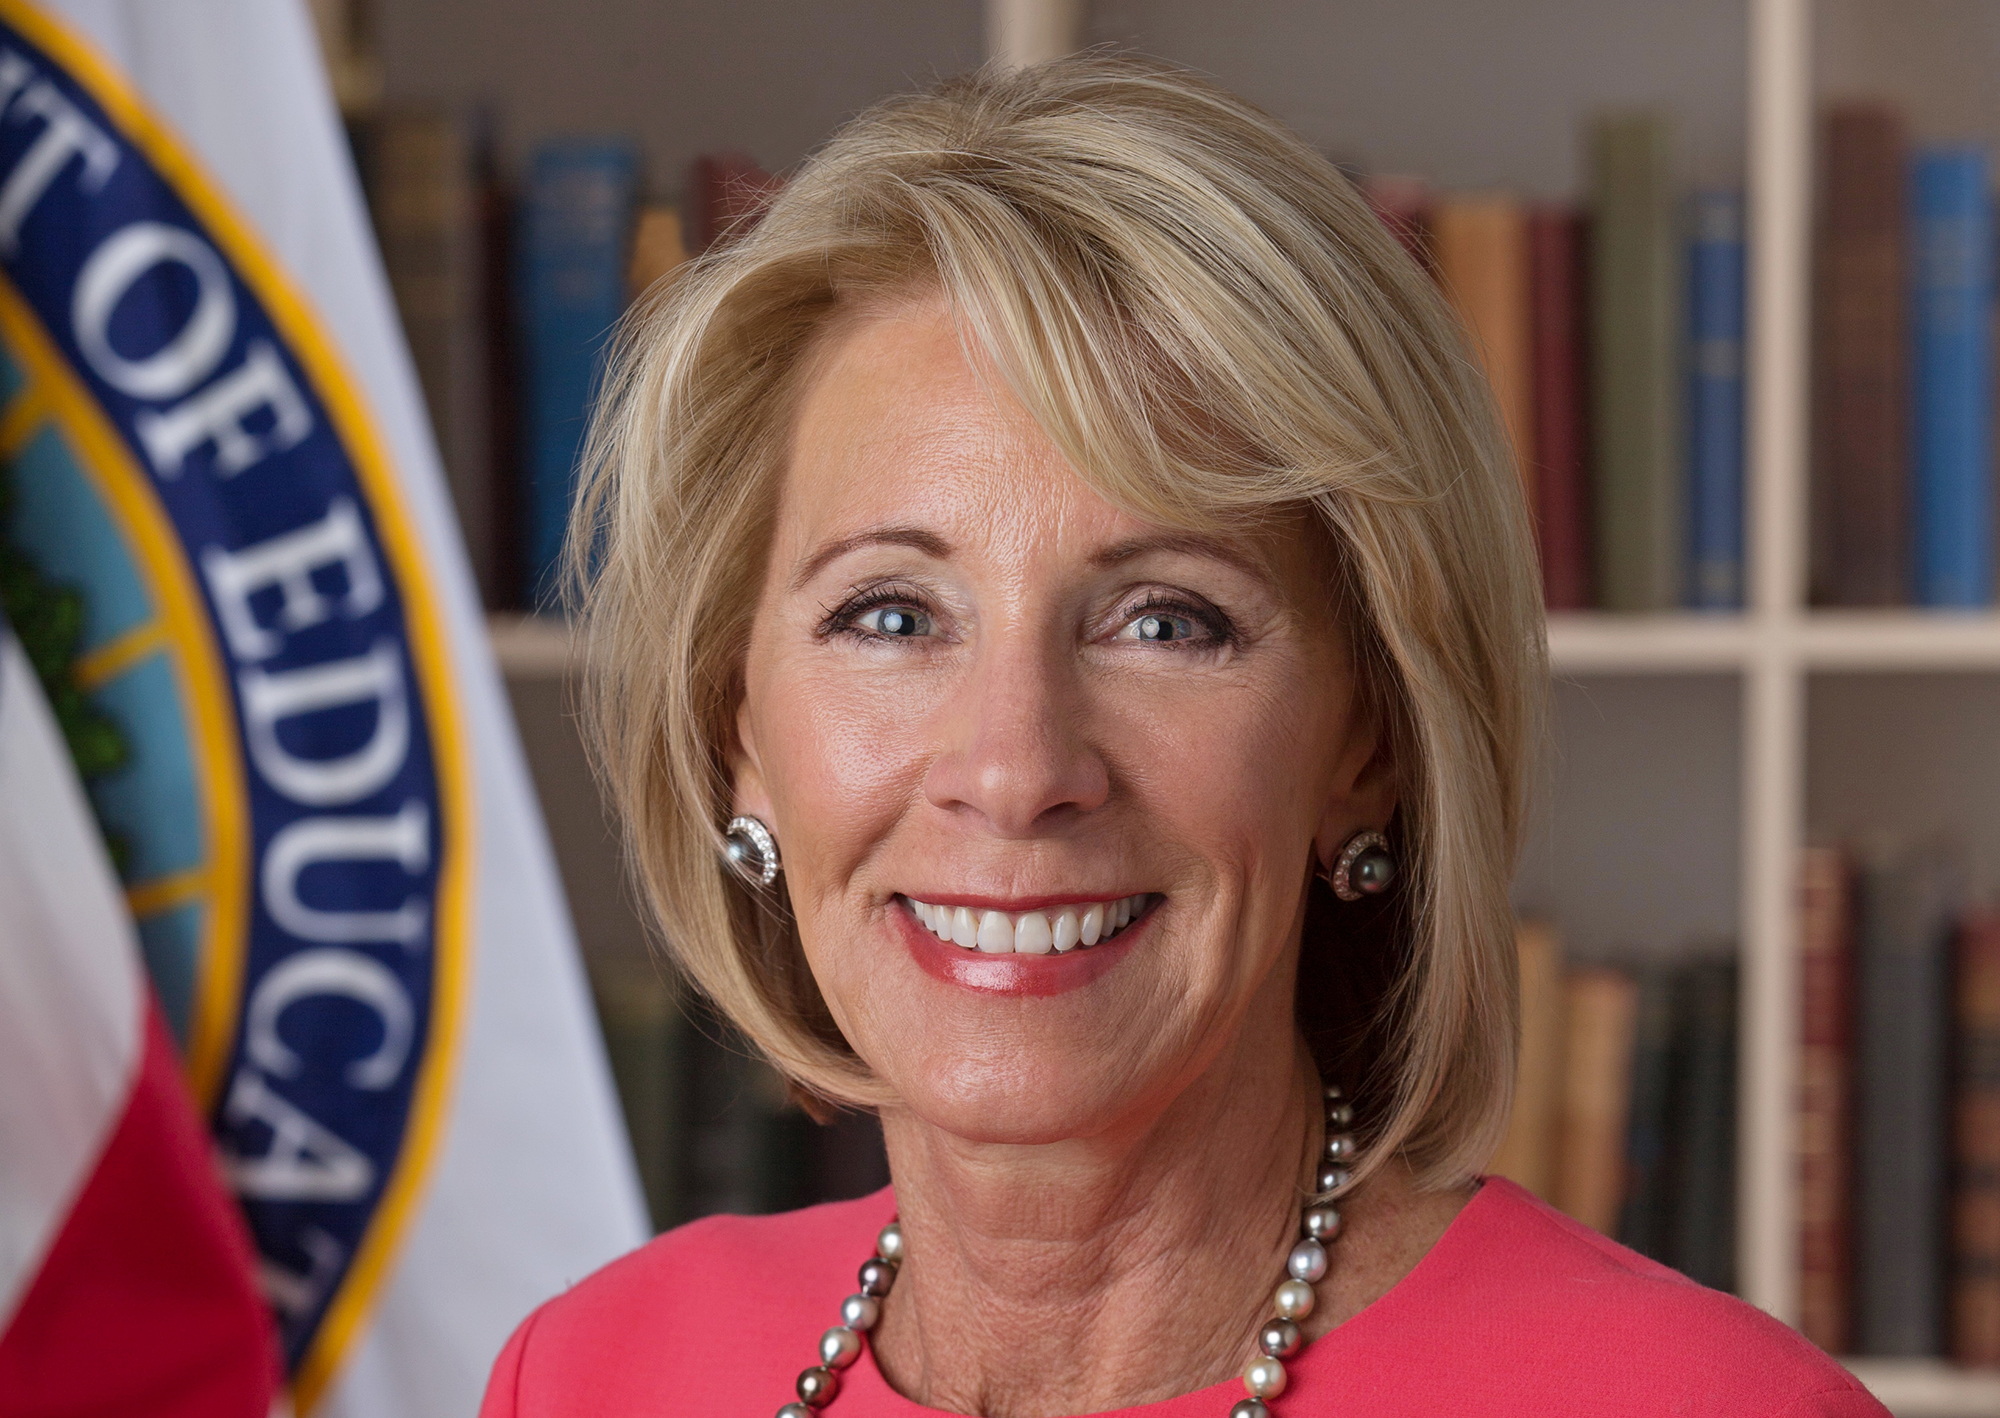 Betsy DeVos Refuses To Work With Consumer Protection Agency On Student Loans